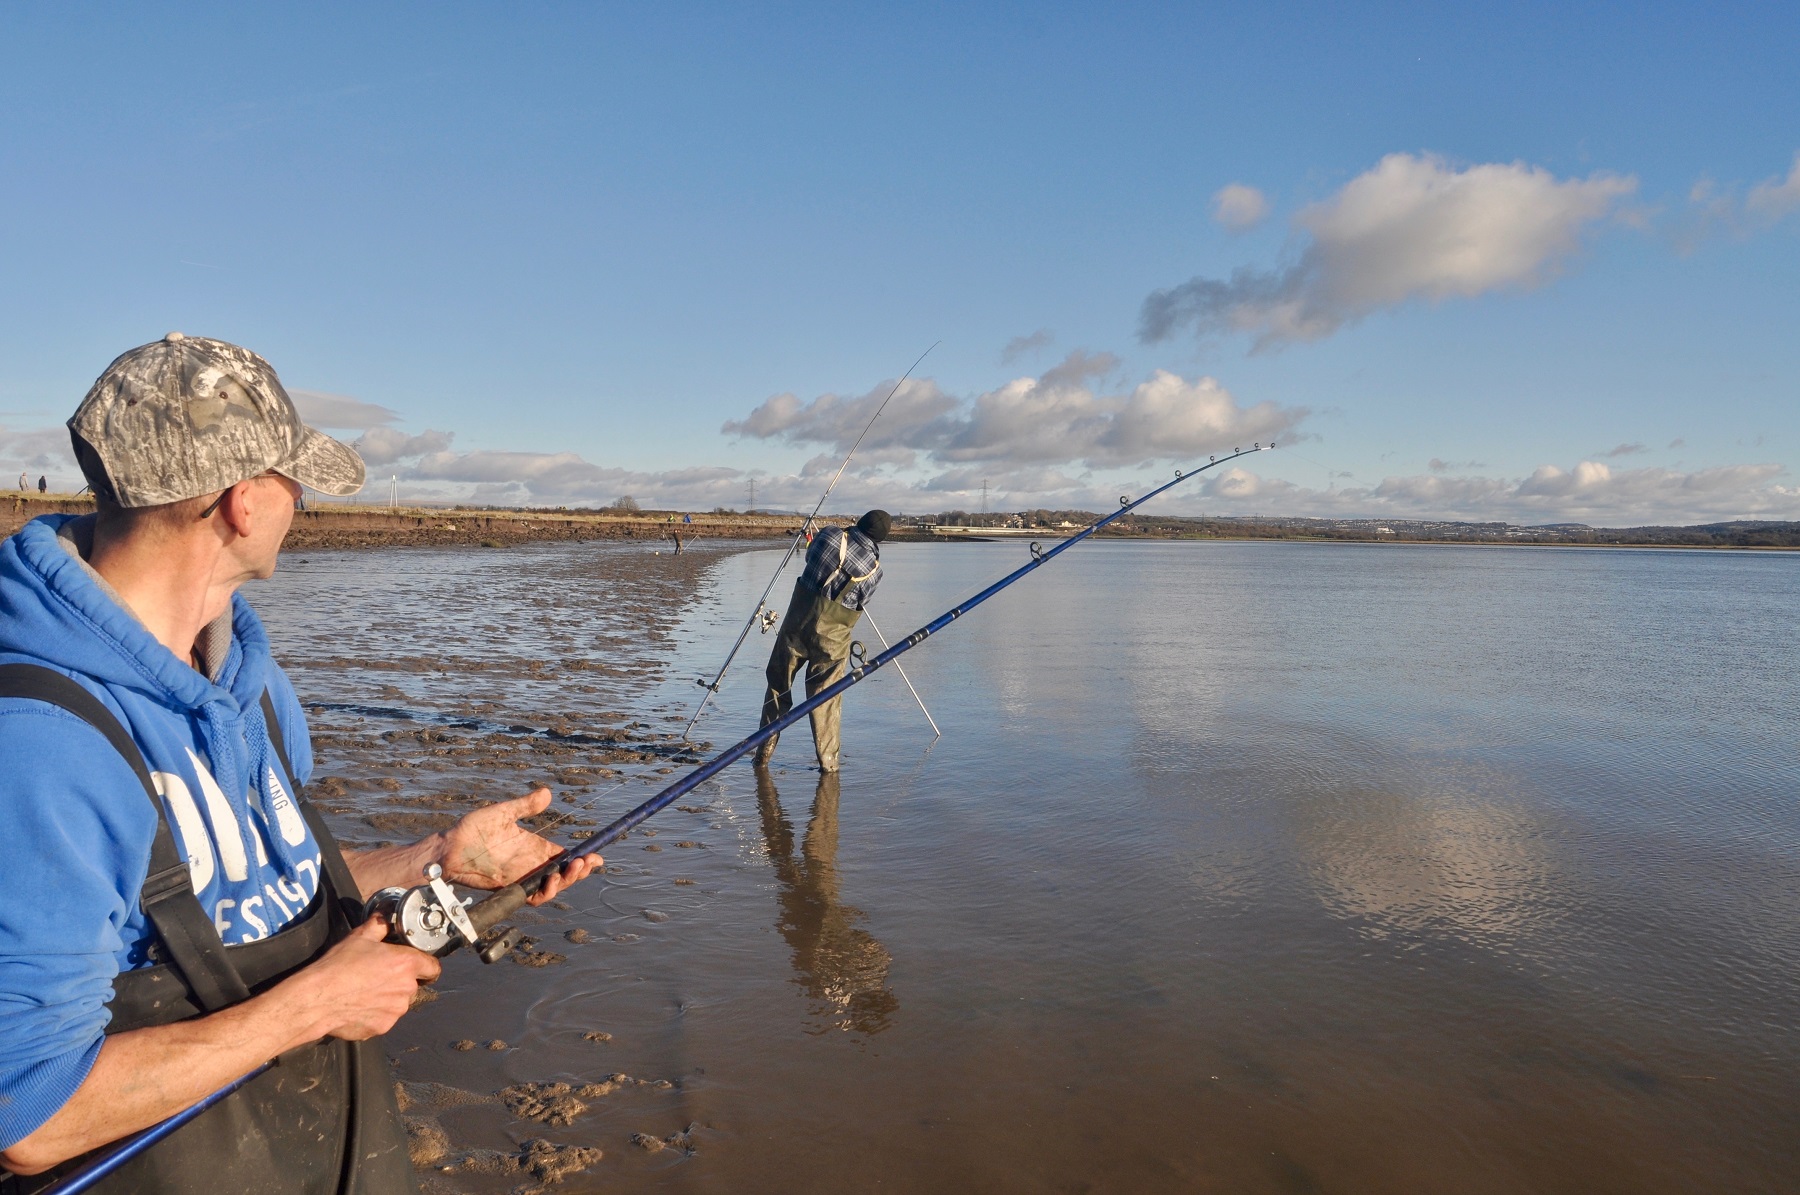 Estuary fishing is very productive in Wales